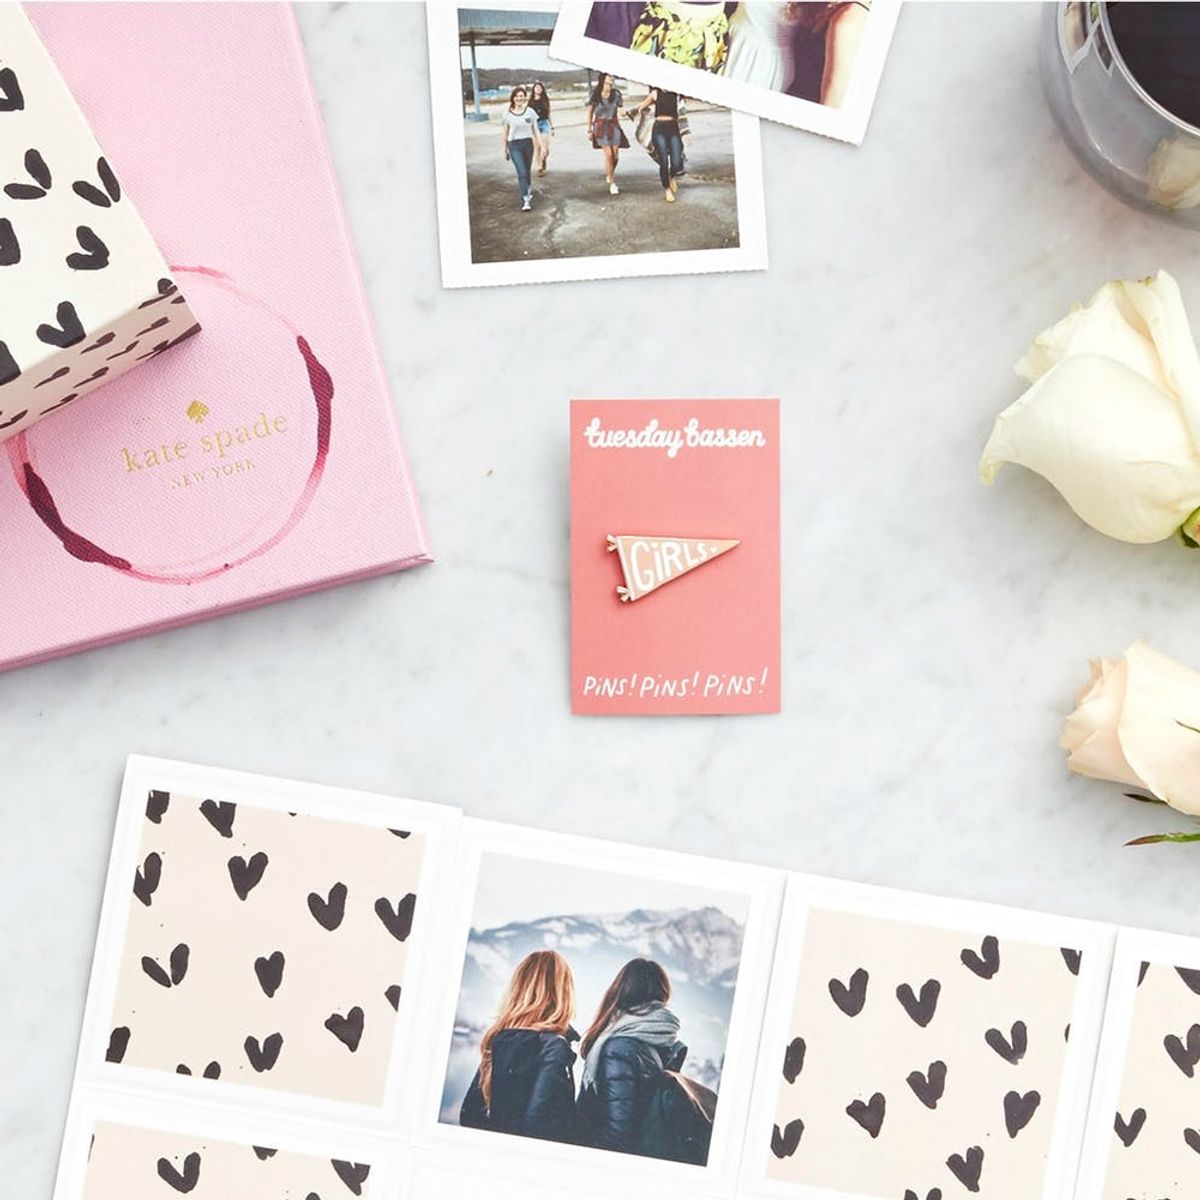 This Site Makes It Easy to Send Sweet Snail Mail to All Your Valentines